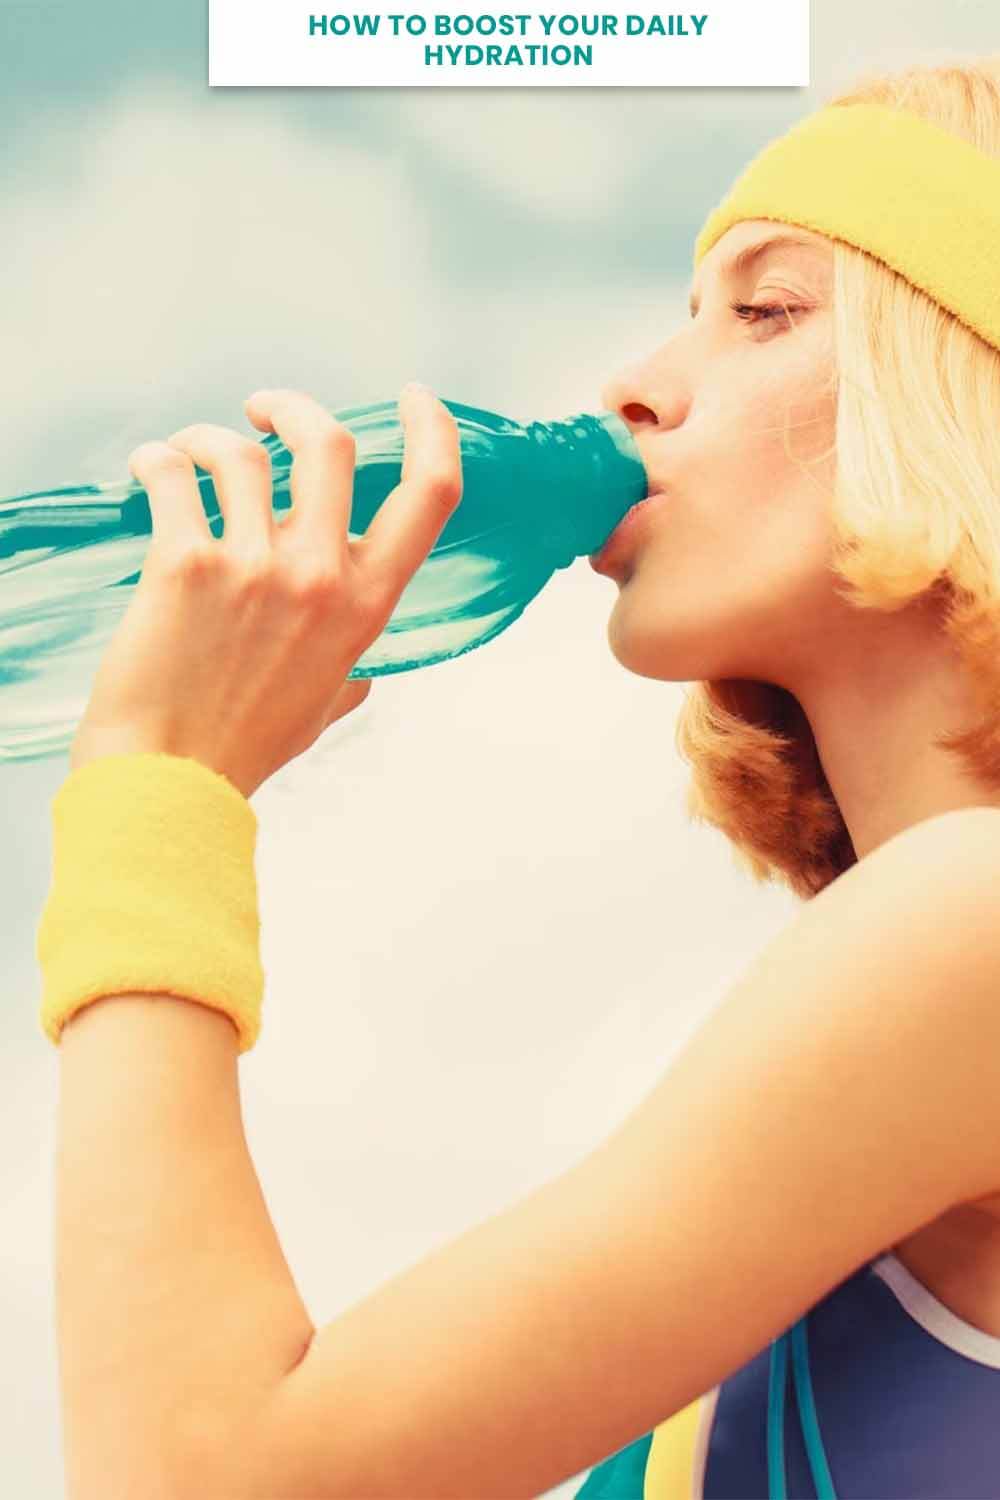 How To Boost Your Daily Hydration